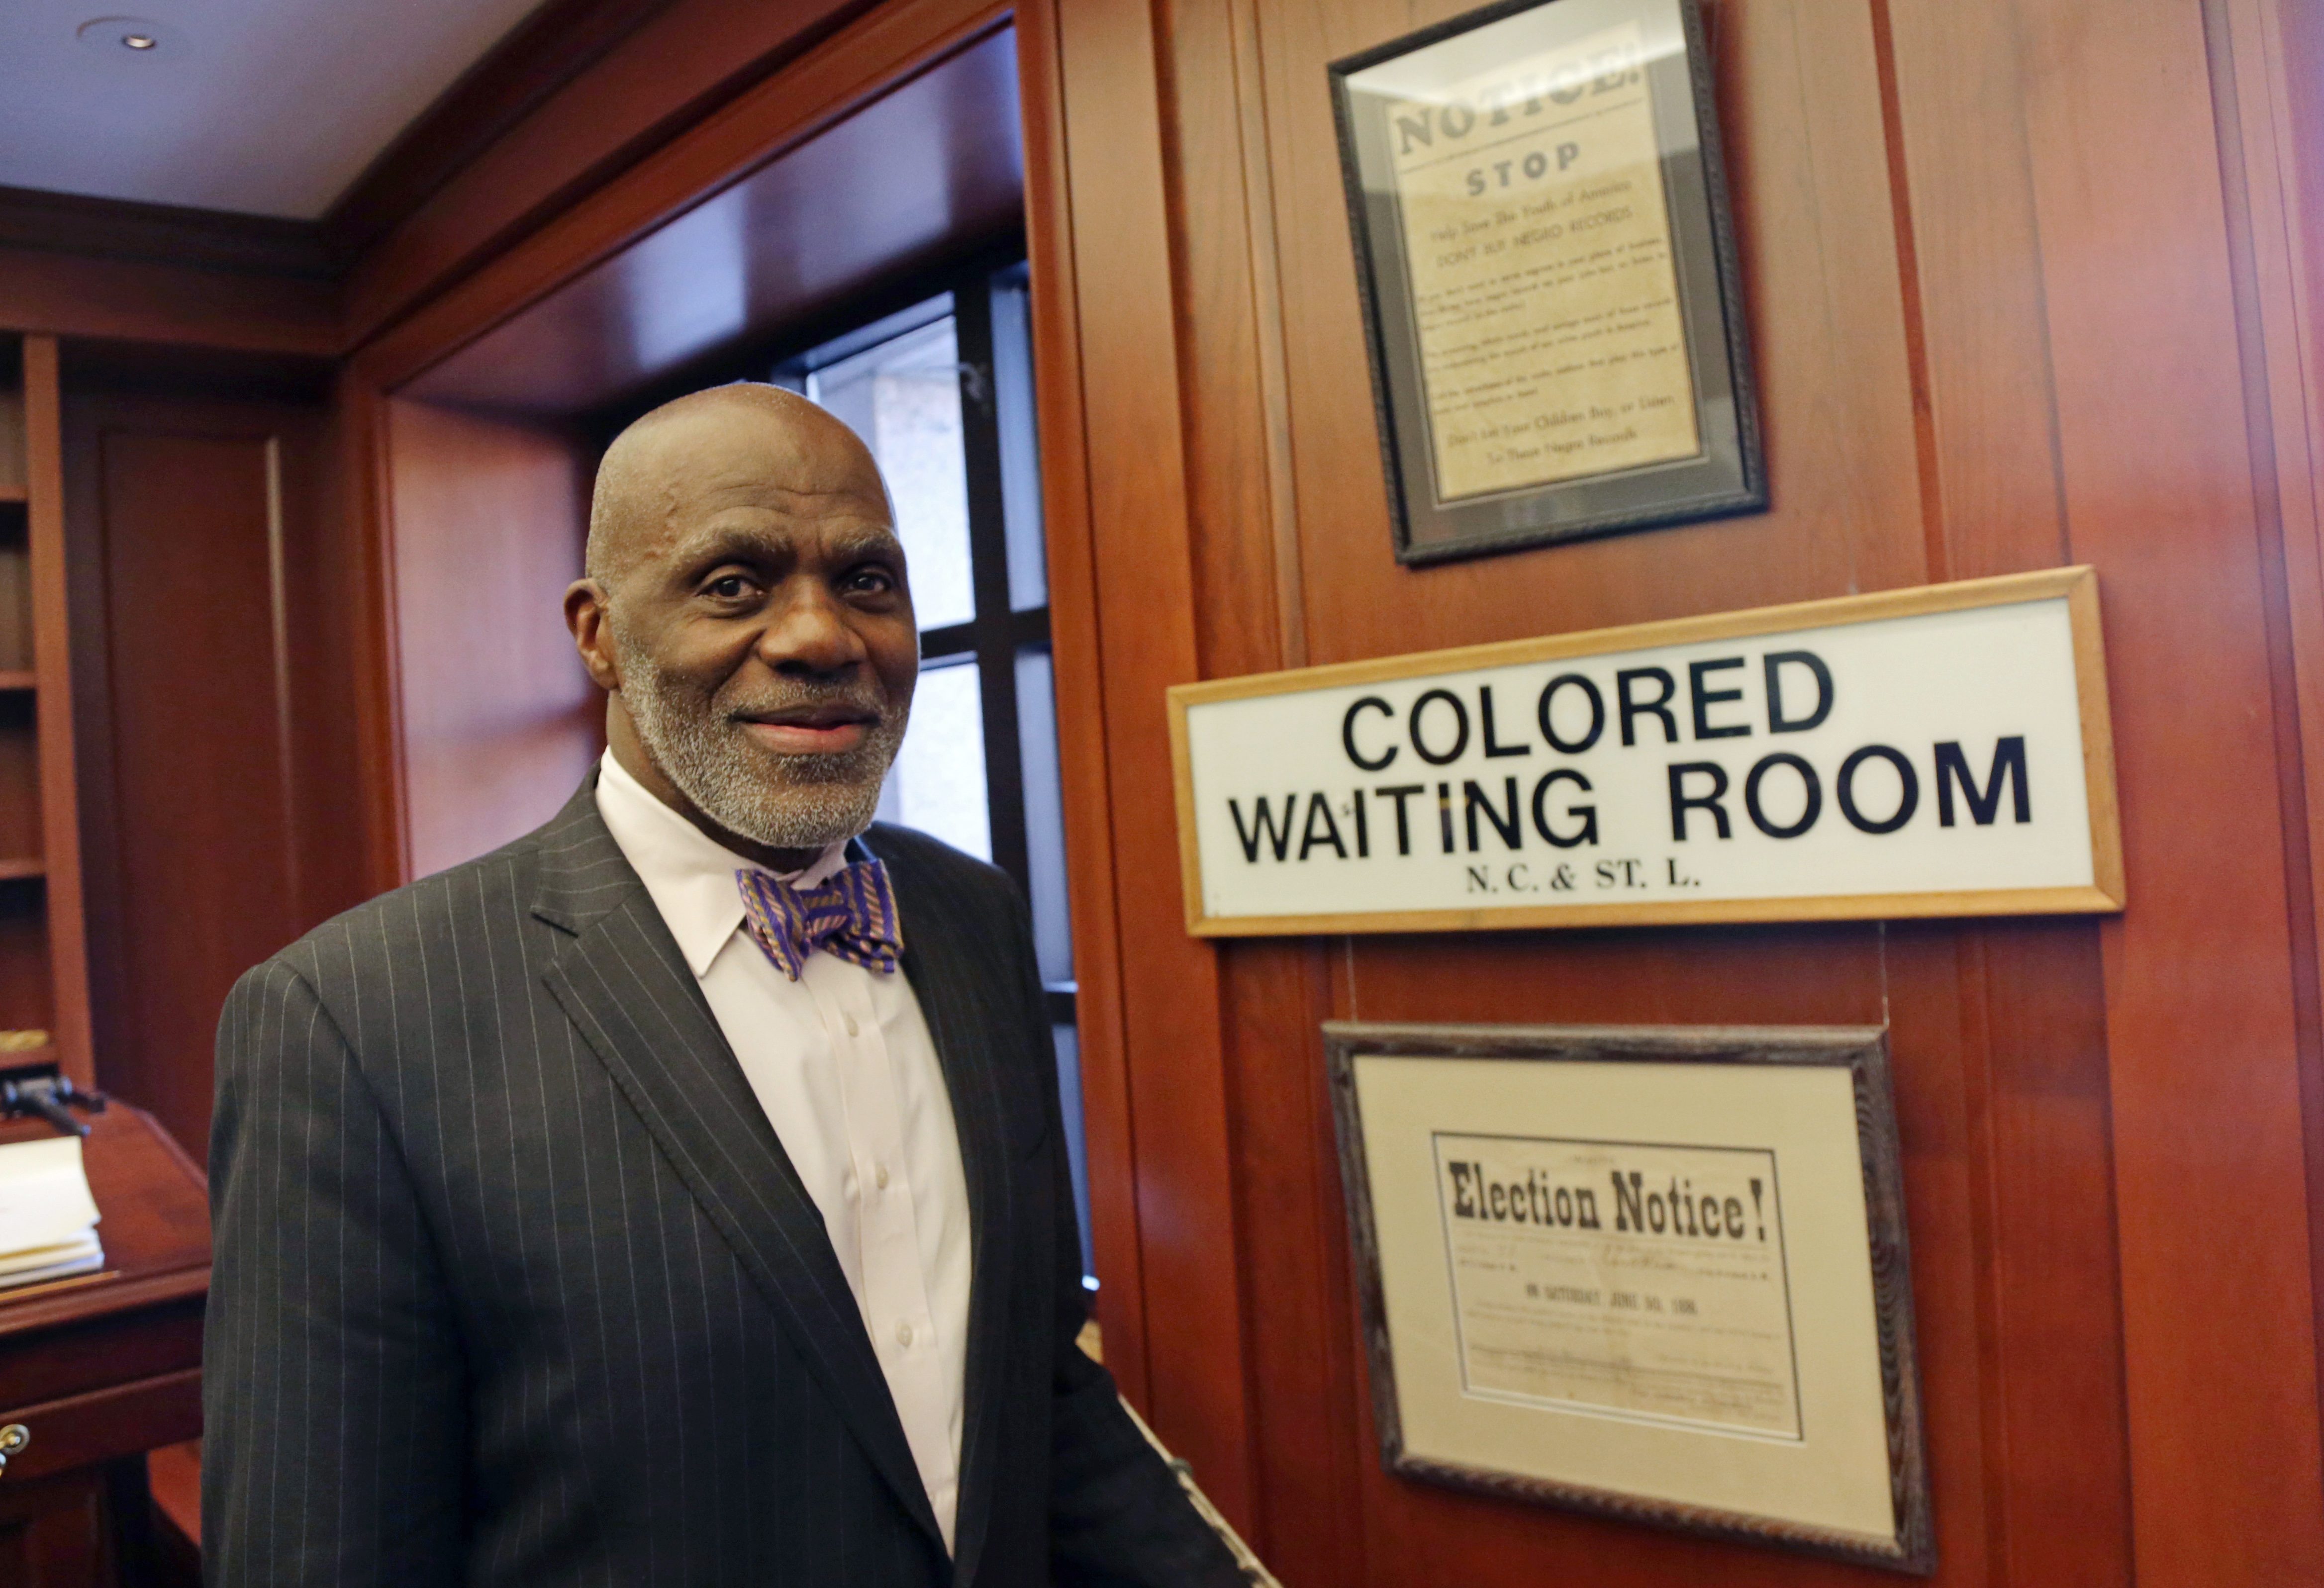 In this Jan 15, 2015, photo, Minnesota Supreme Court Justice Alan Page poses in his chambers hes decorated with some jarring reminders of the segregation era, such as a Colored Waiting Room sign from a southern railroad, during an interview  in St. Paul, Minn. Page hits the mandatory retirement age of 70 later this year.  (AP Photo/Jim Mone)